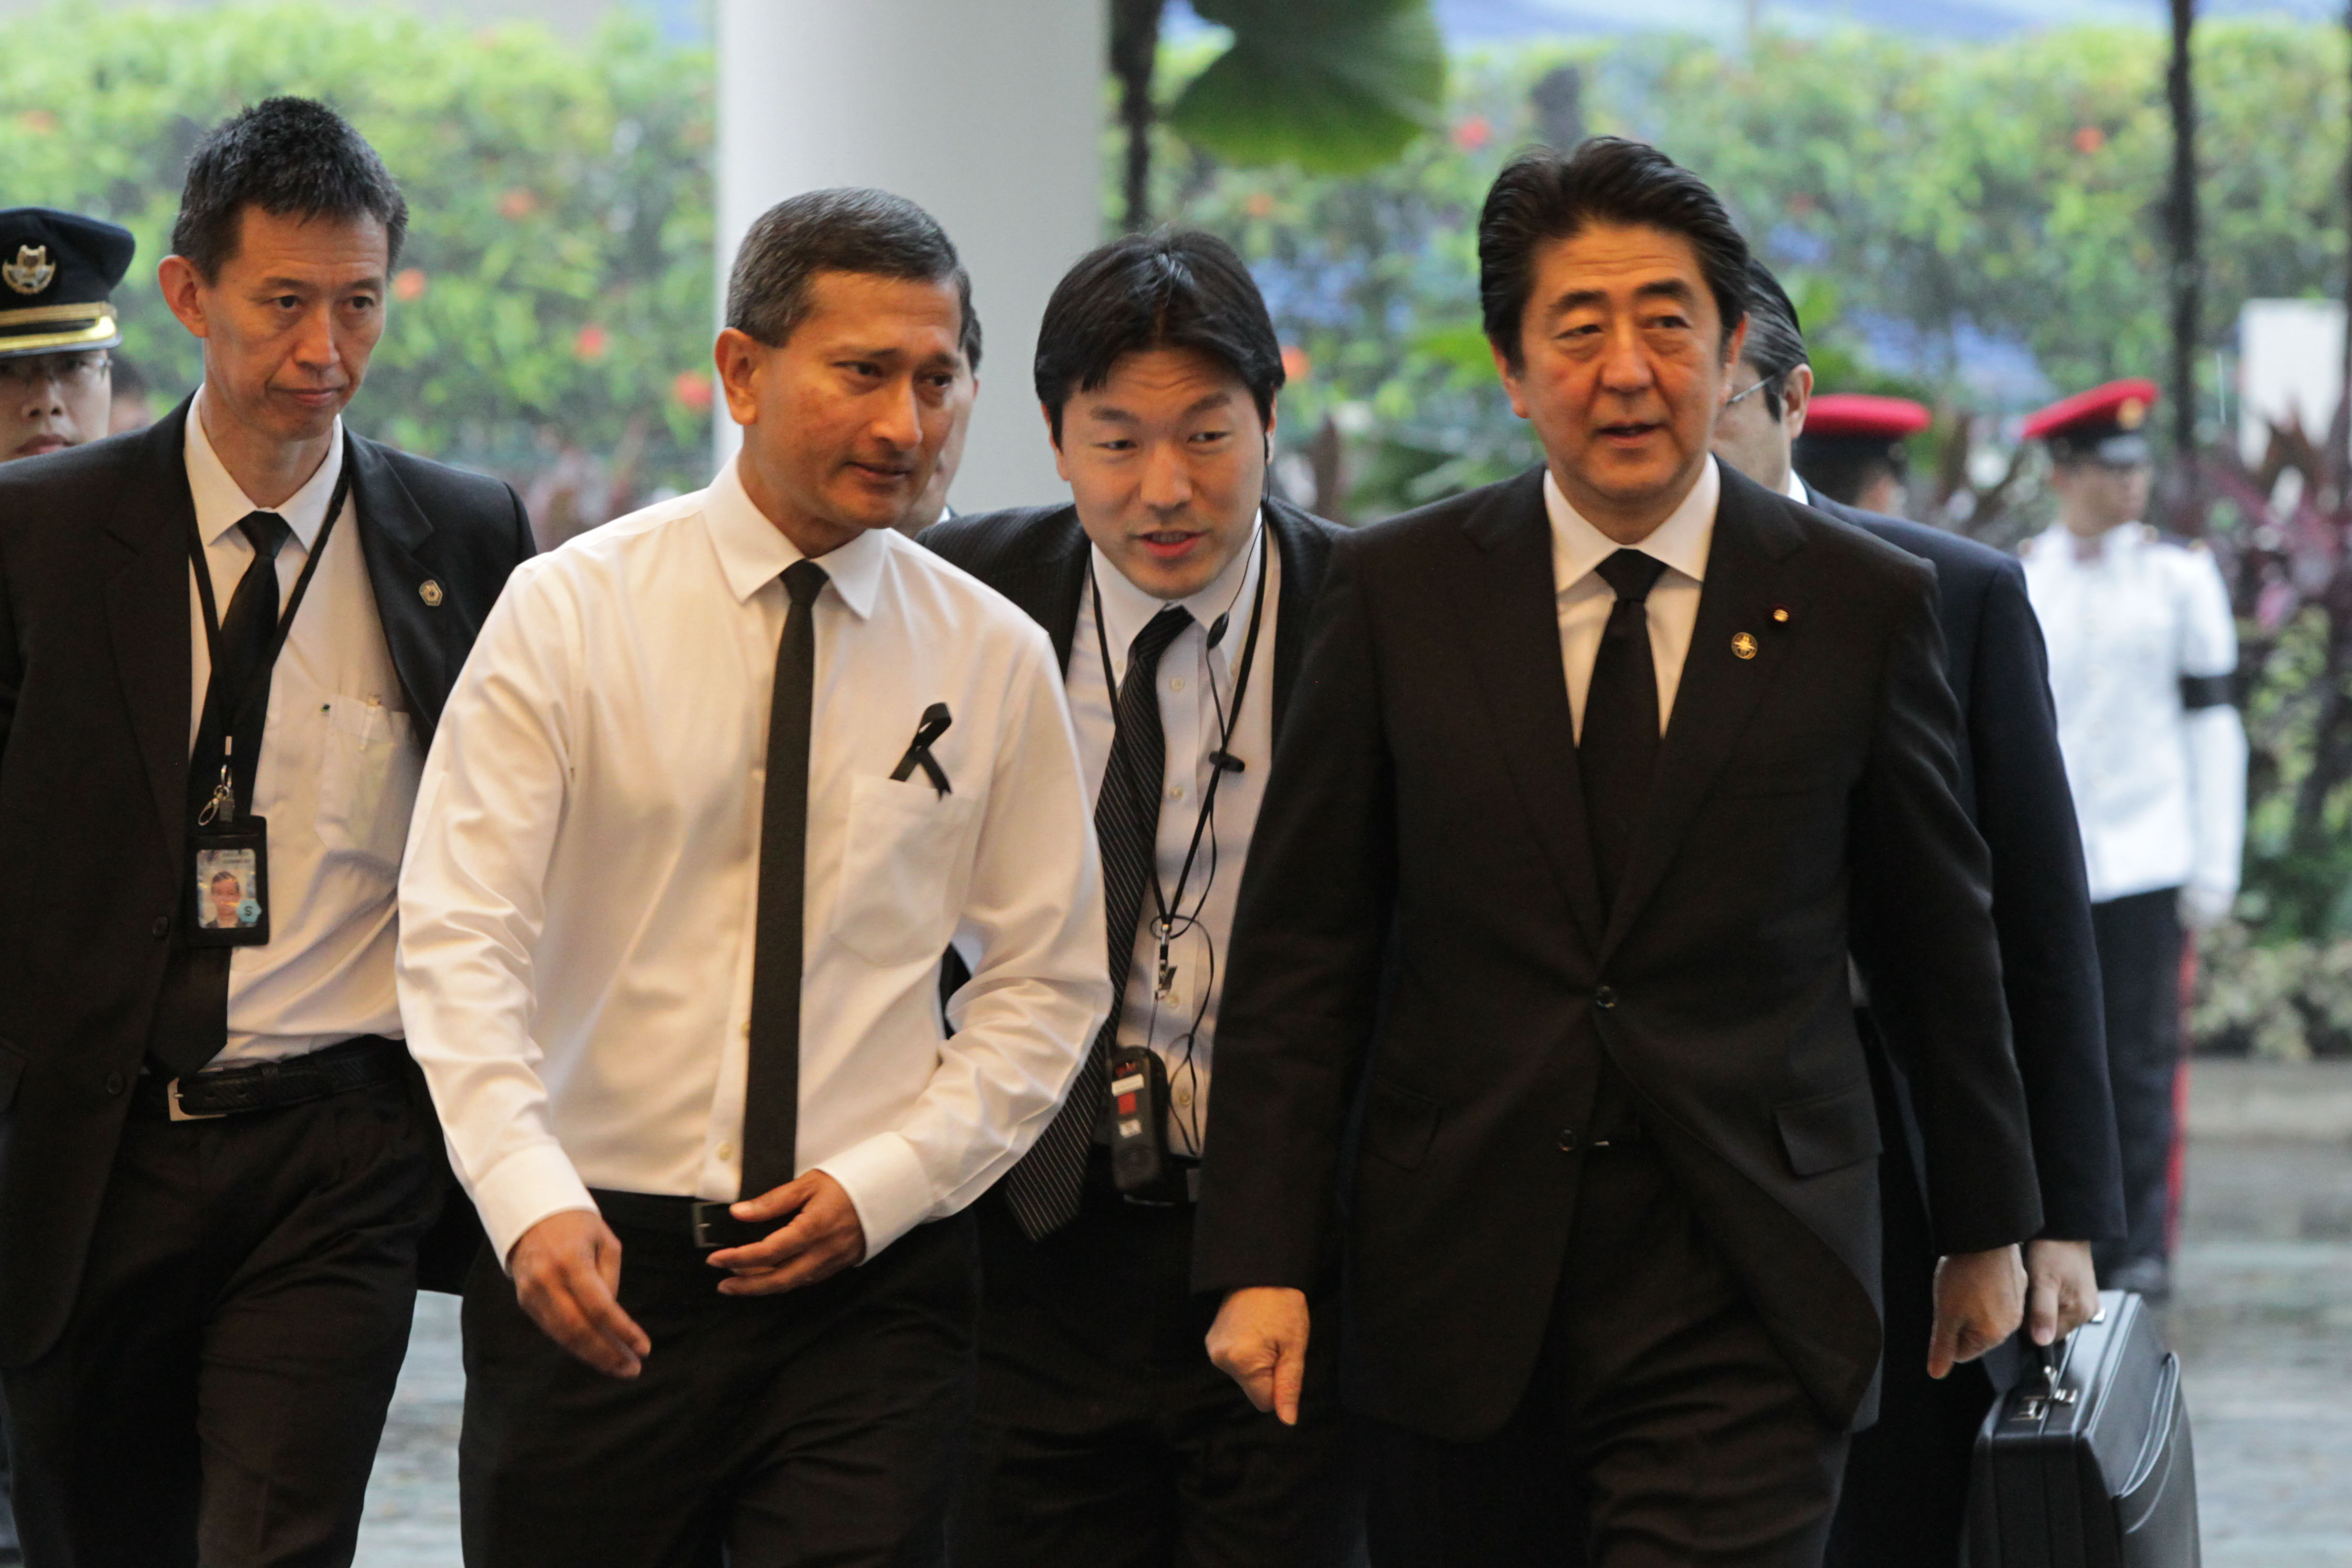 SINGAPORE, MARCH 29: In this handout image provided by the Ministry of Communications and Information (MCI) of Singapore, Prime Minister Shinzo Abe attends the funeral of the late Mr Lee Kuan Yew at the University Cultural Centre, National University of Singapore on March 29, 2015 in Singapore. Mr Lee Kuan Yew passed away on the morning of March 23, 2015 at Singapore General Hospital at the age of 91. Lee Kuan Yew was a Singaporean politician and the first Prime Minister of the country, governing for over 30 years and famed for his achievements in bringing a third world country to first world status in a single generation. (Photo by Ministry of Communications and Information of Singapore via Getty Images)